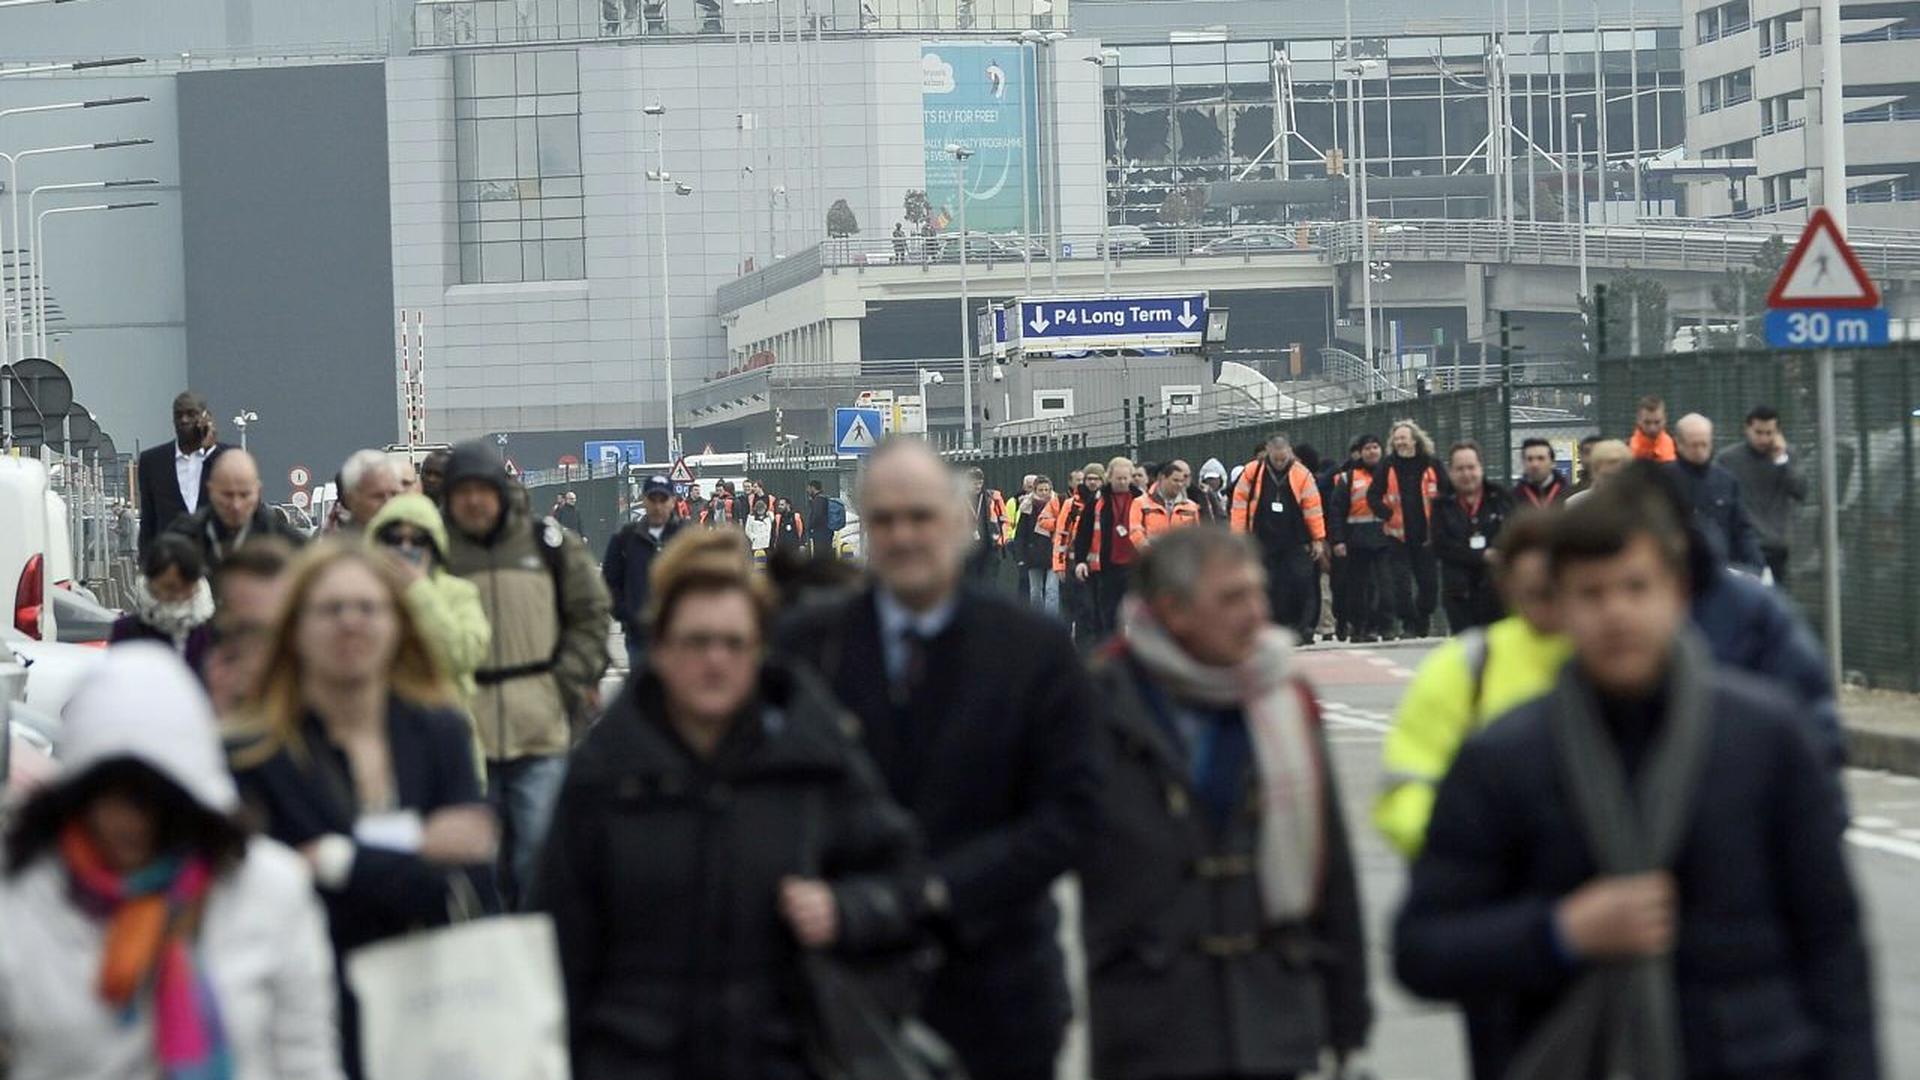 People are evacuated from Brussels Airport, in Zaventem, on March 22, 2016.  after at least 13 people have been killed by two explosions in the departure hall of Brussels Airport.  / AFP PHOTO / Belga / LAURIE DIEFFEMBACQ / Belgium OUT